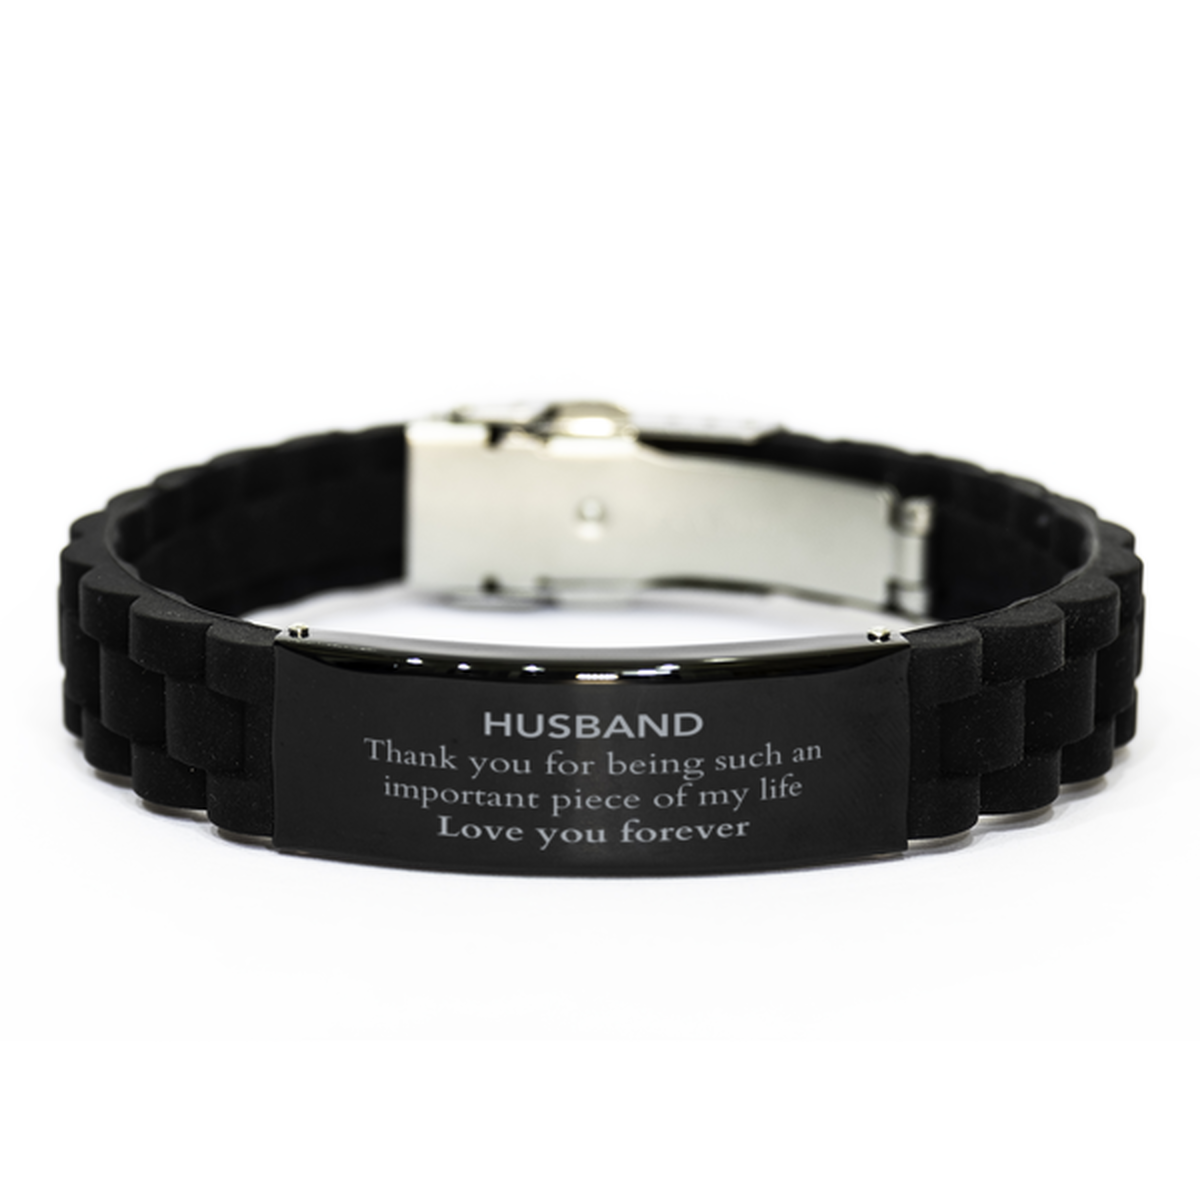 Appropriate Husband Black Glidelock Clasp Bracelet Epic Birthday Gifts for Husband Thank you for being such an important piece of my life Husband Christmas Mothers Fathers Day